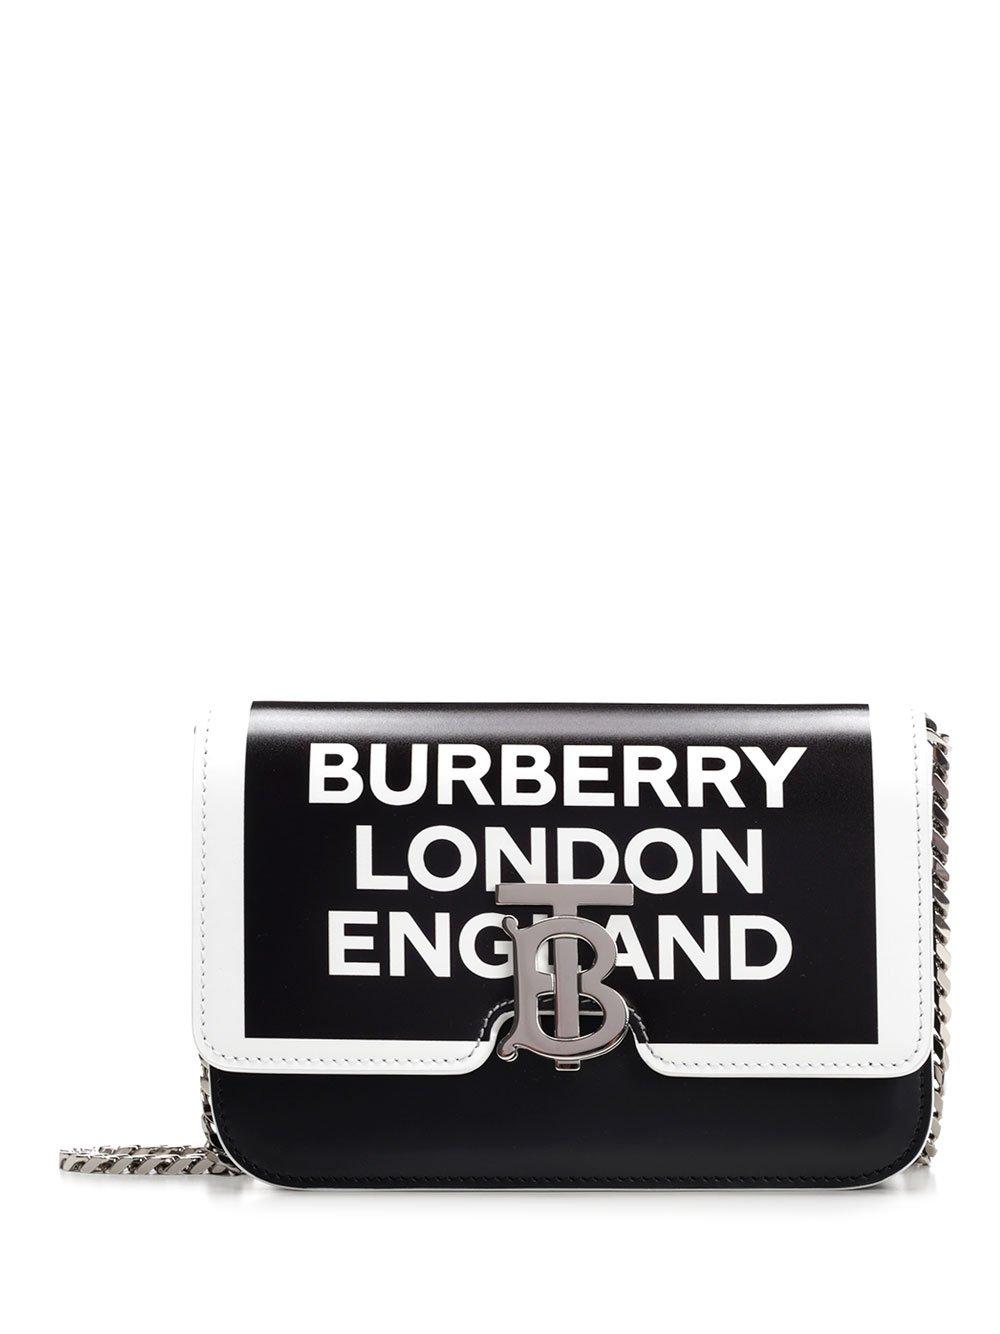 Lyst - Burberry Monogram Clasp Leather Cross-body Bag in Black - Save 43%